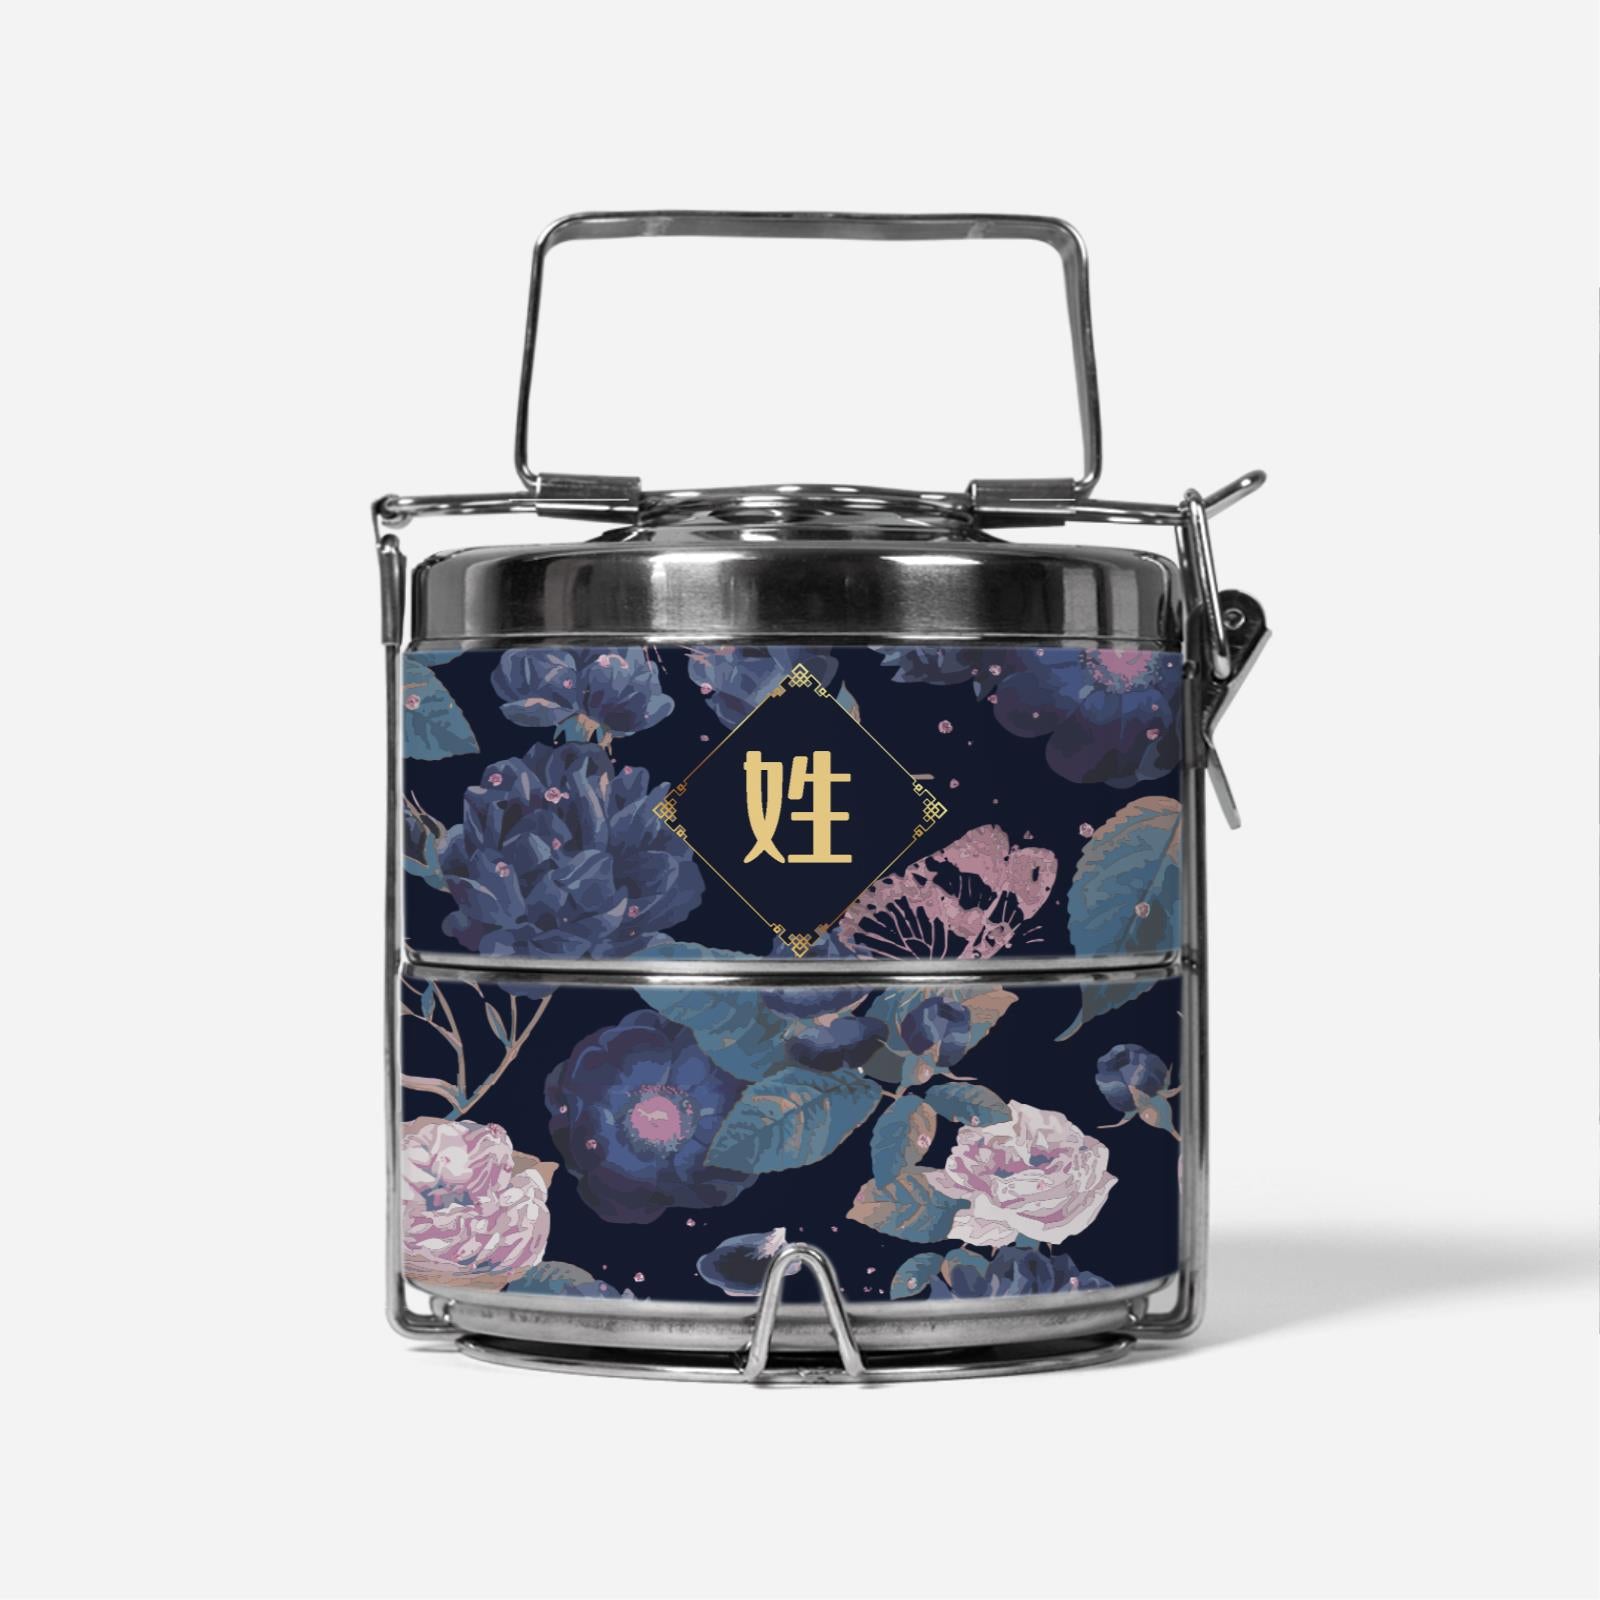 Royal Floral Series With Chinese Surname Two Tier Premium Tiffin Carrier - Serene Moonlight